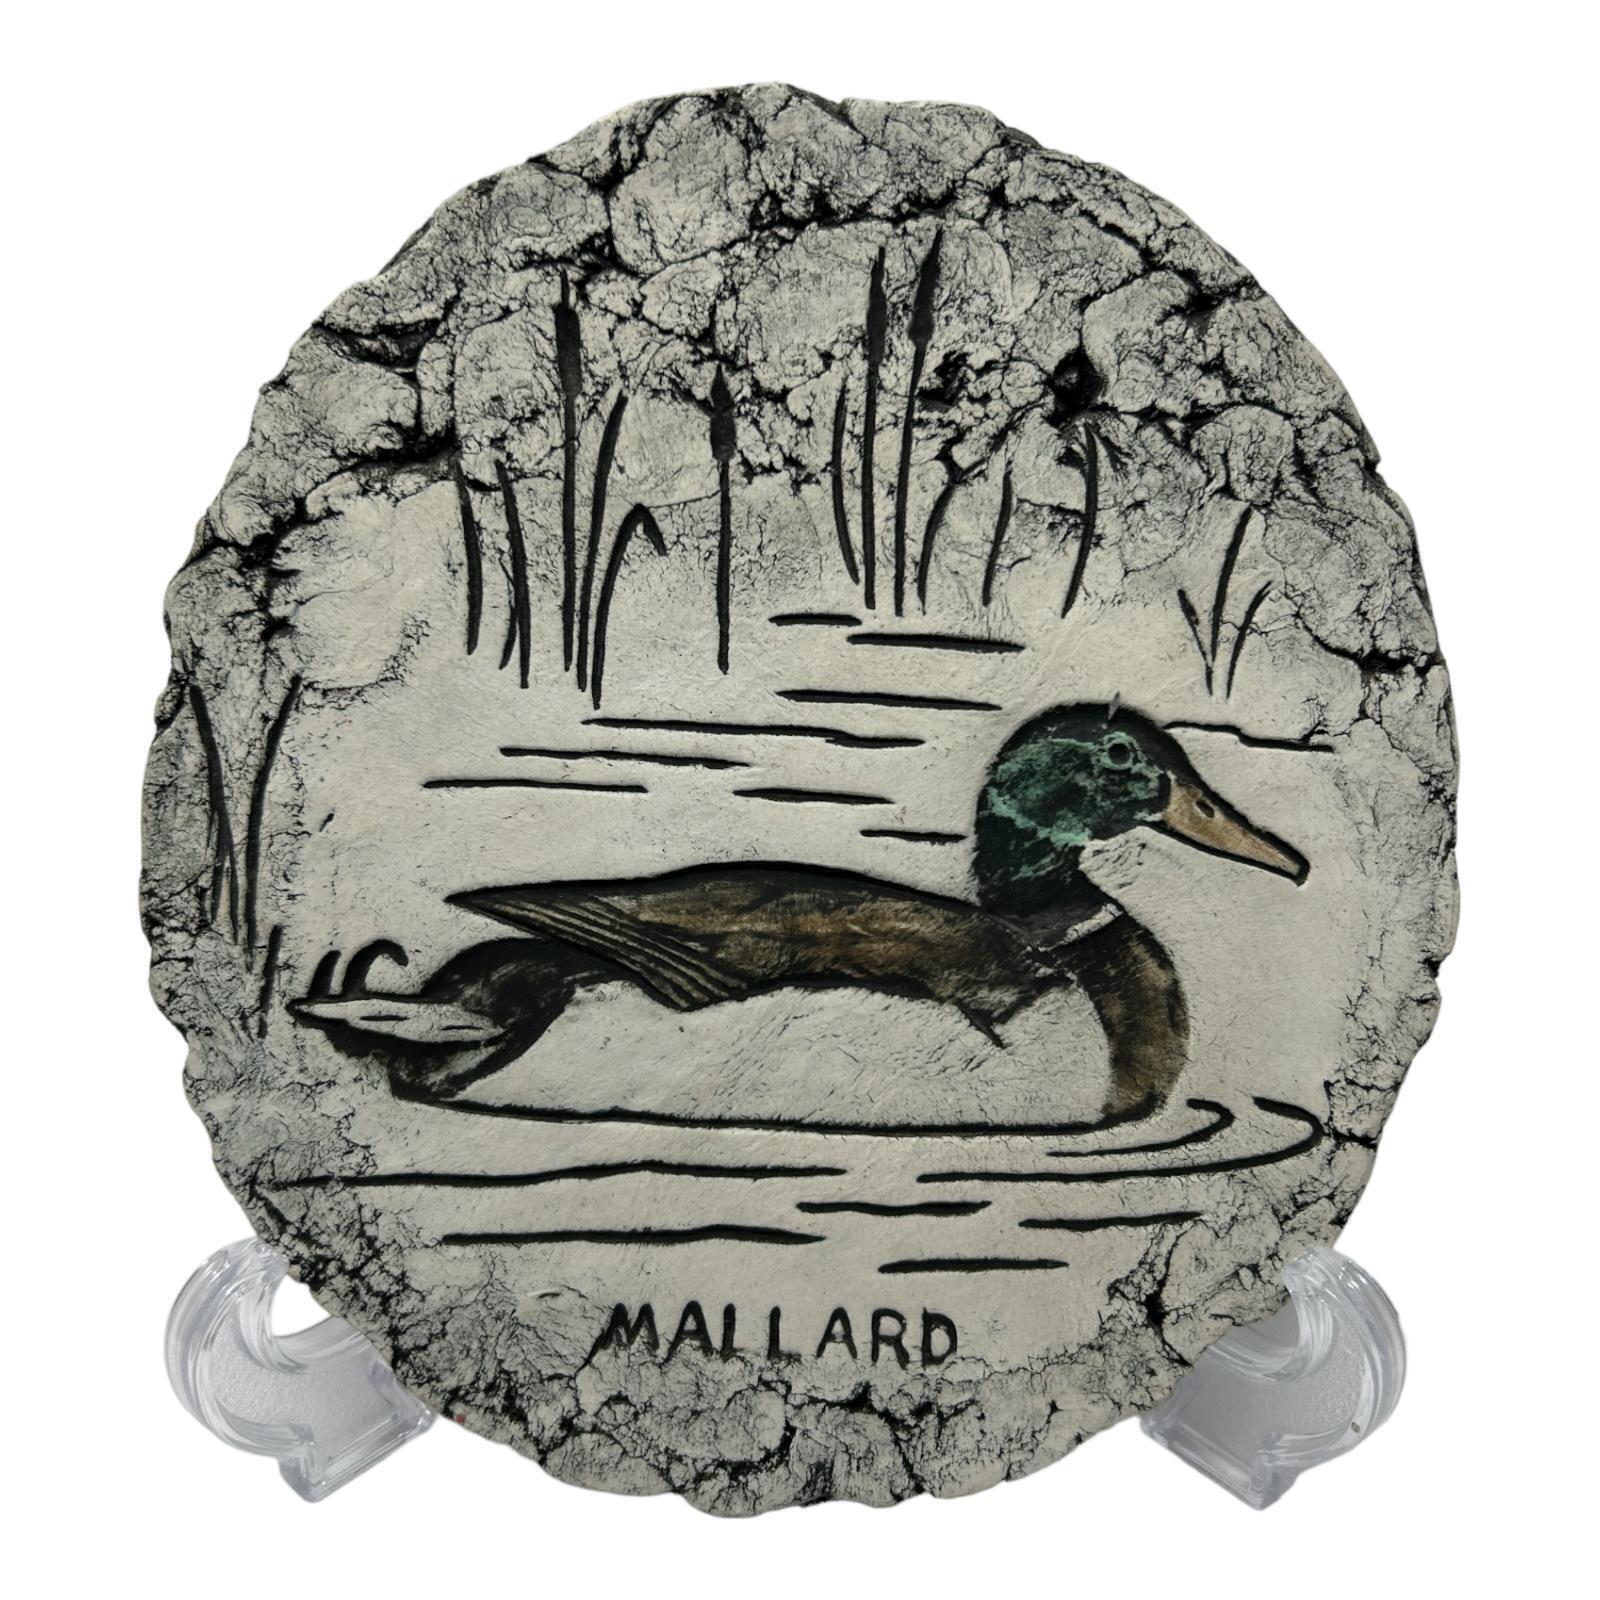 Stan Langtwait Shapes Of Clay Round Wall Plaque Mallard Wading Duck 7x6.5